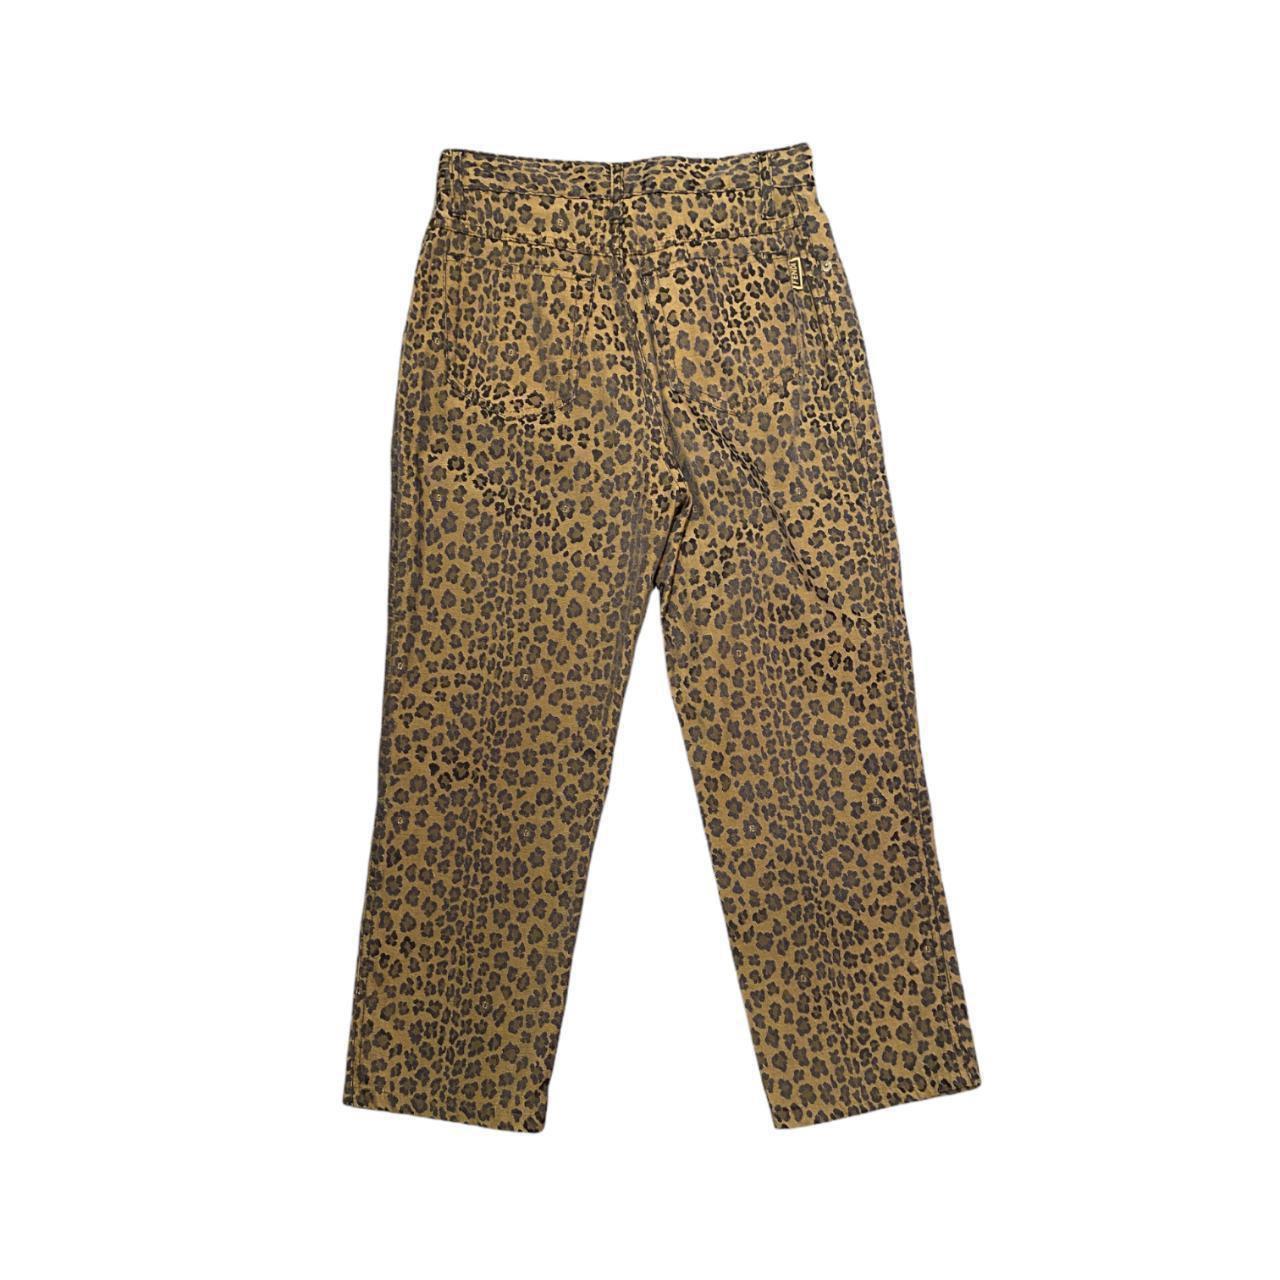 Women's Fendi Trousers   Leopard High-Waisted Jeans For Sale